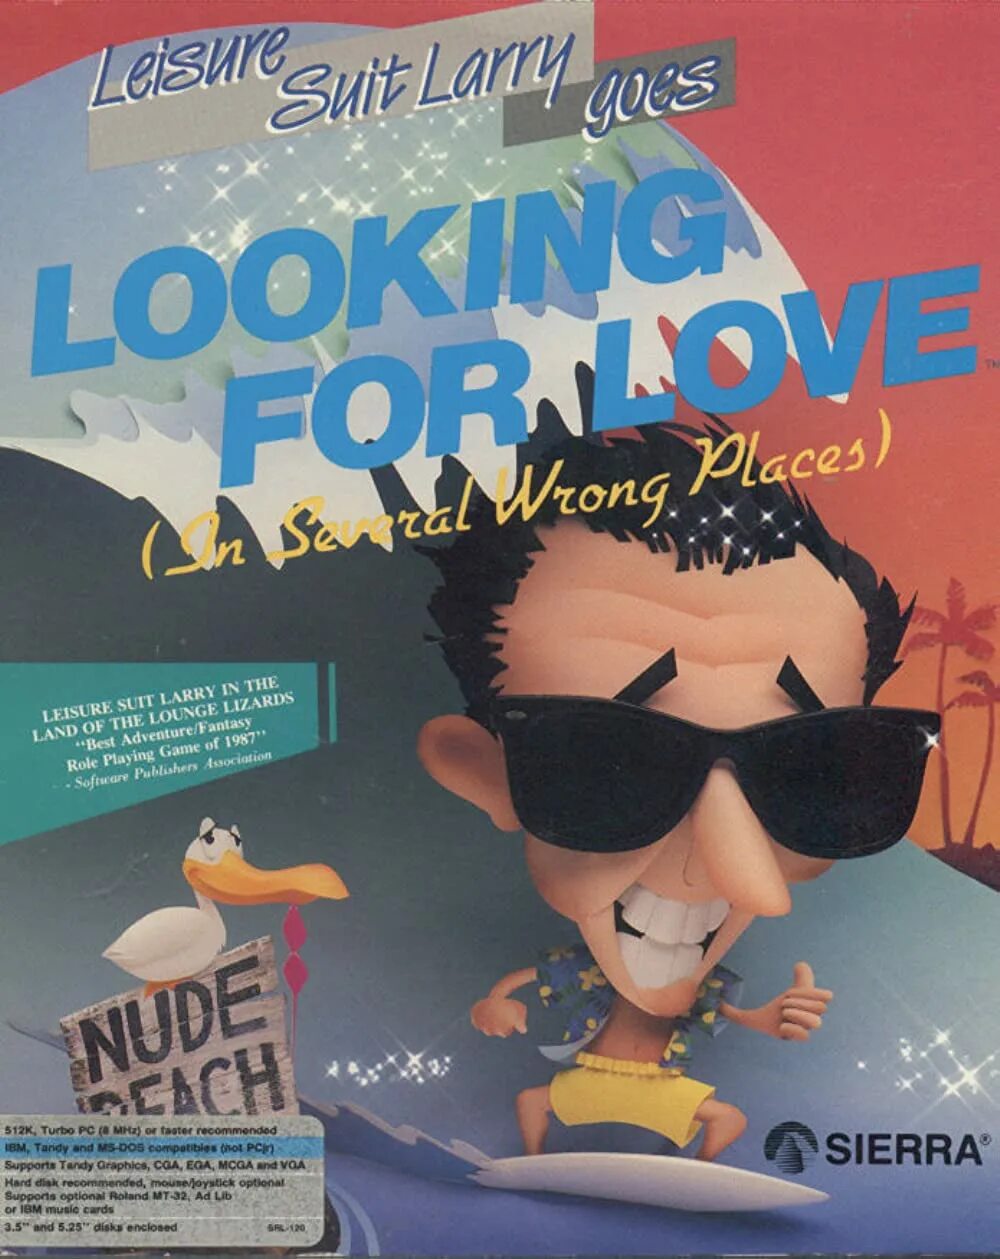 Leisure Suit Larry goes looking for Love (in several wrong places). Leisure Suit Larry goes looking for Love. Ларри в выходном костюме.